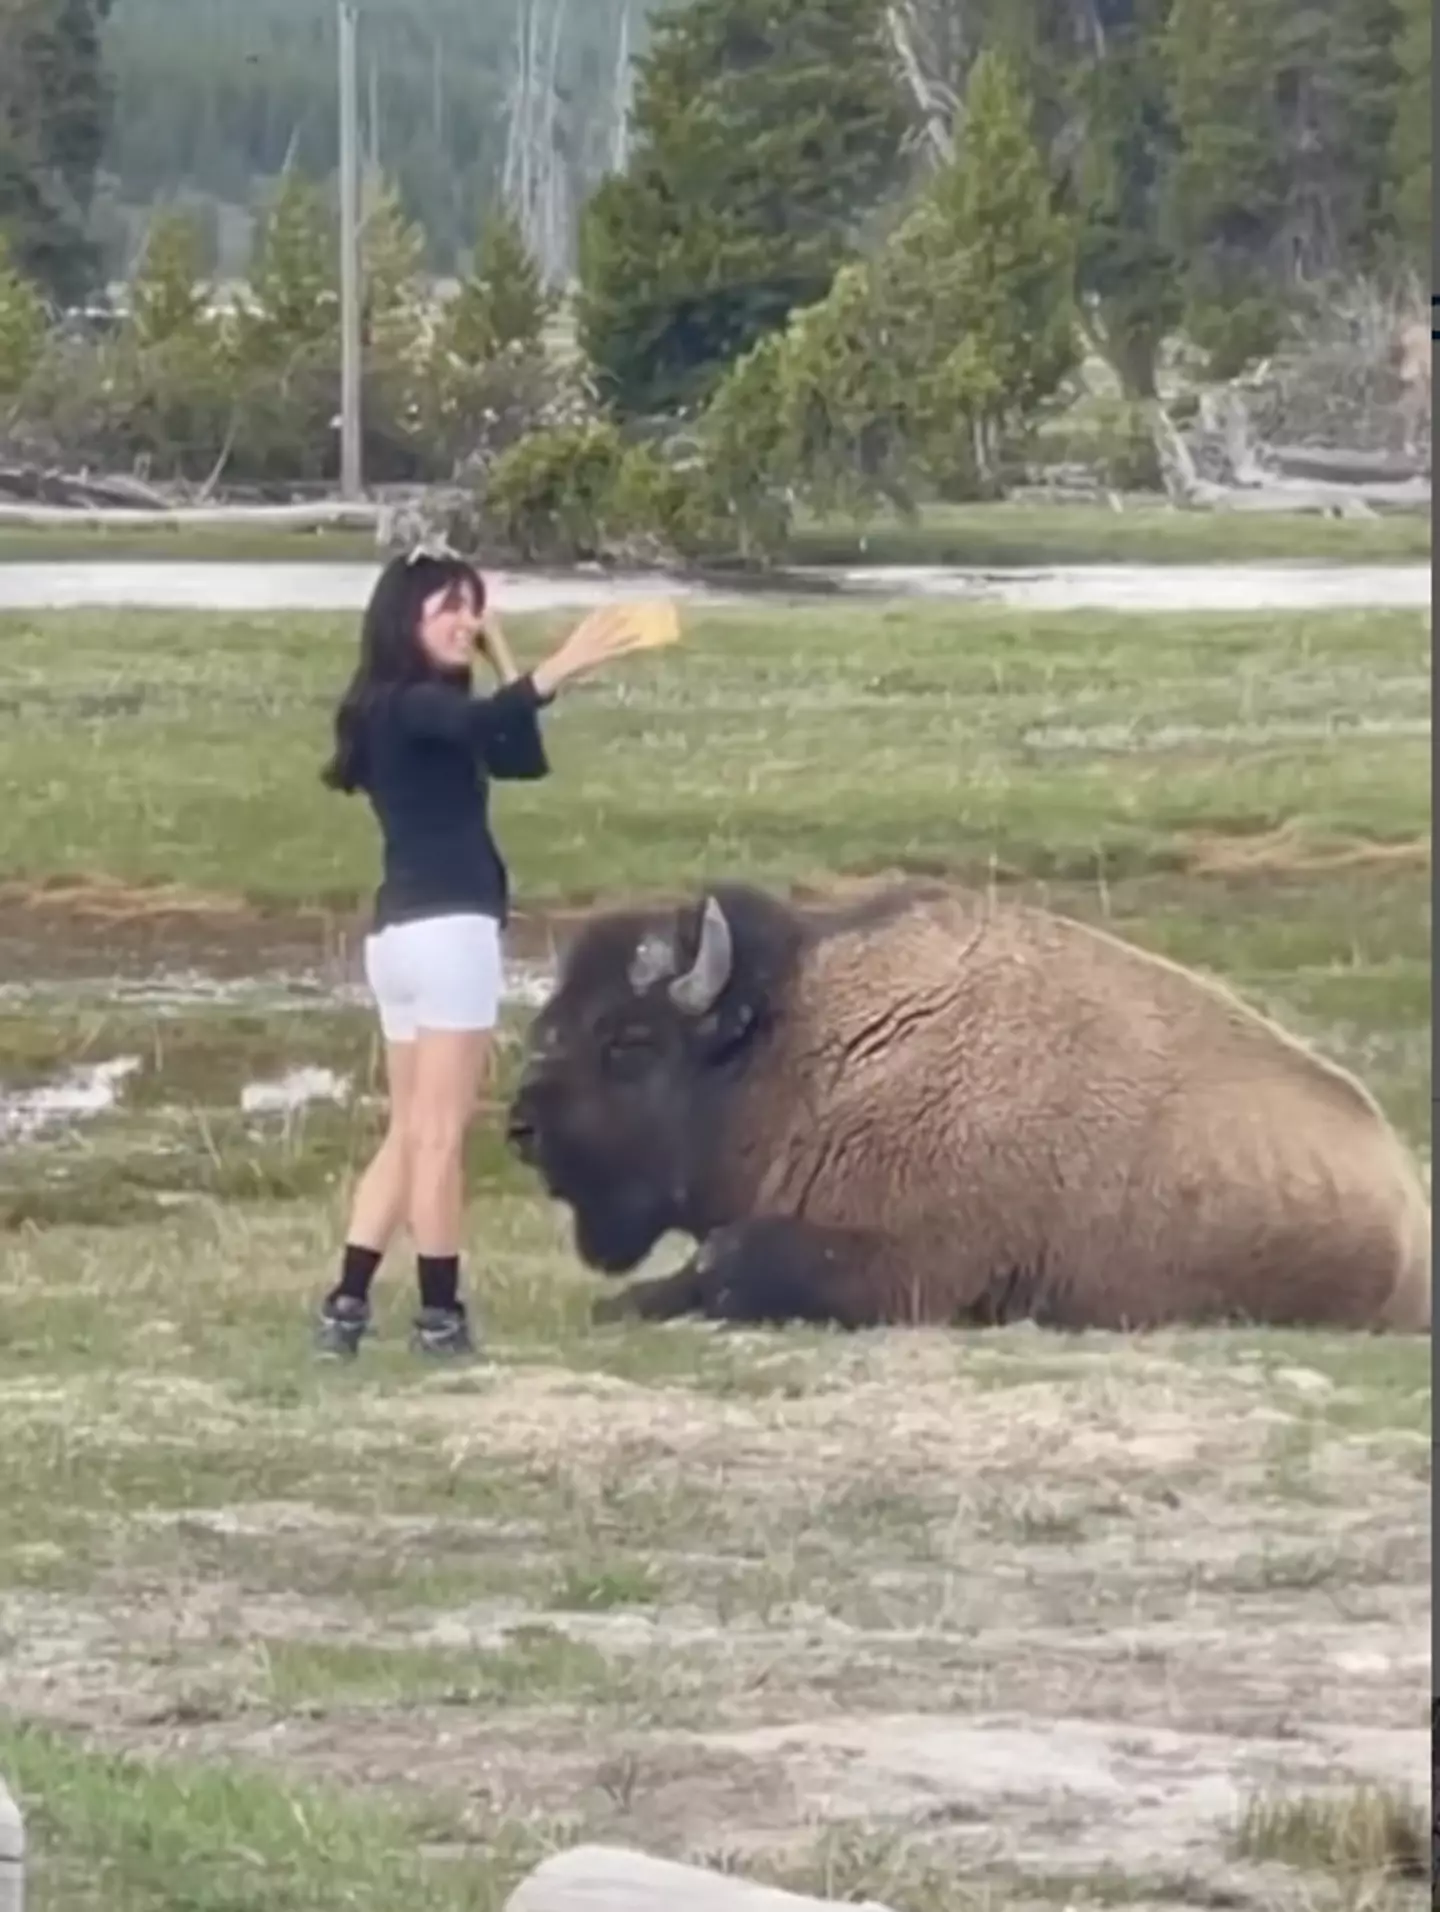 This woman tried to take a selfie with the dangerous animal.